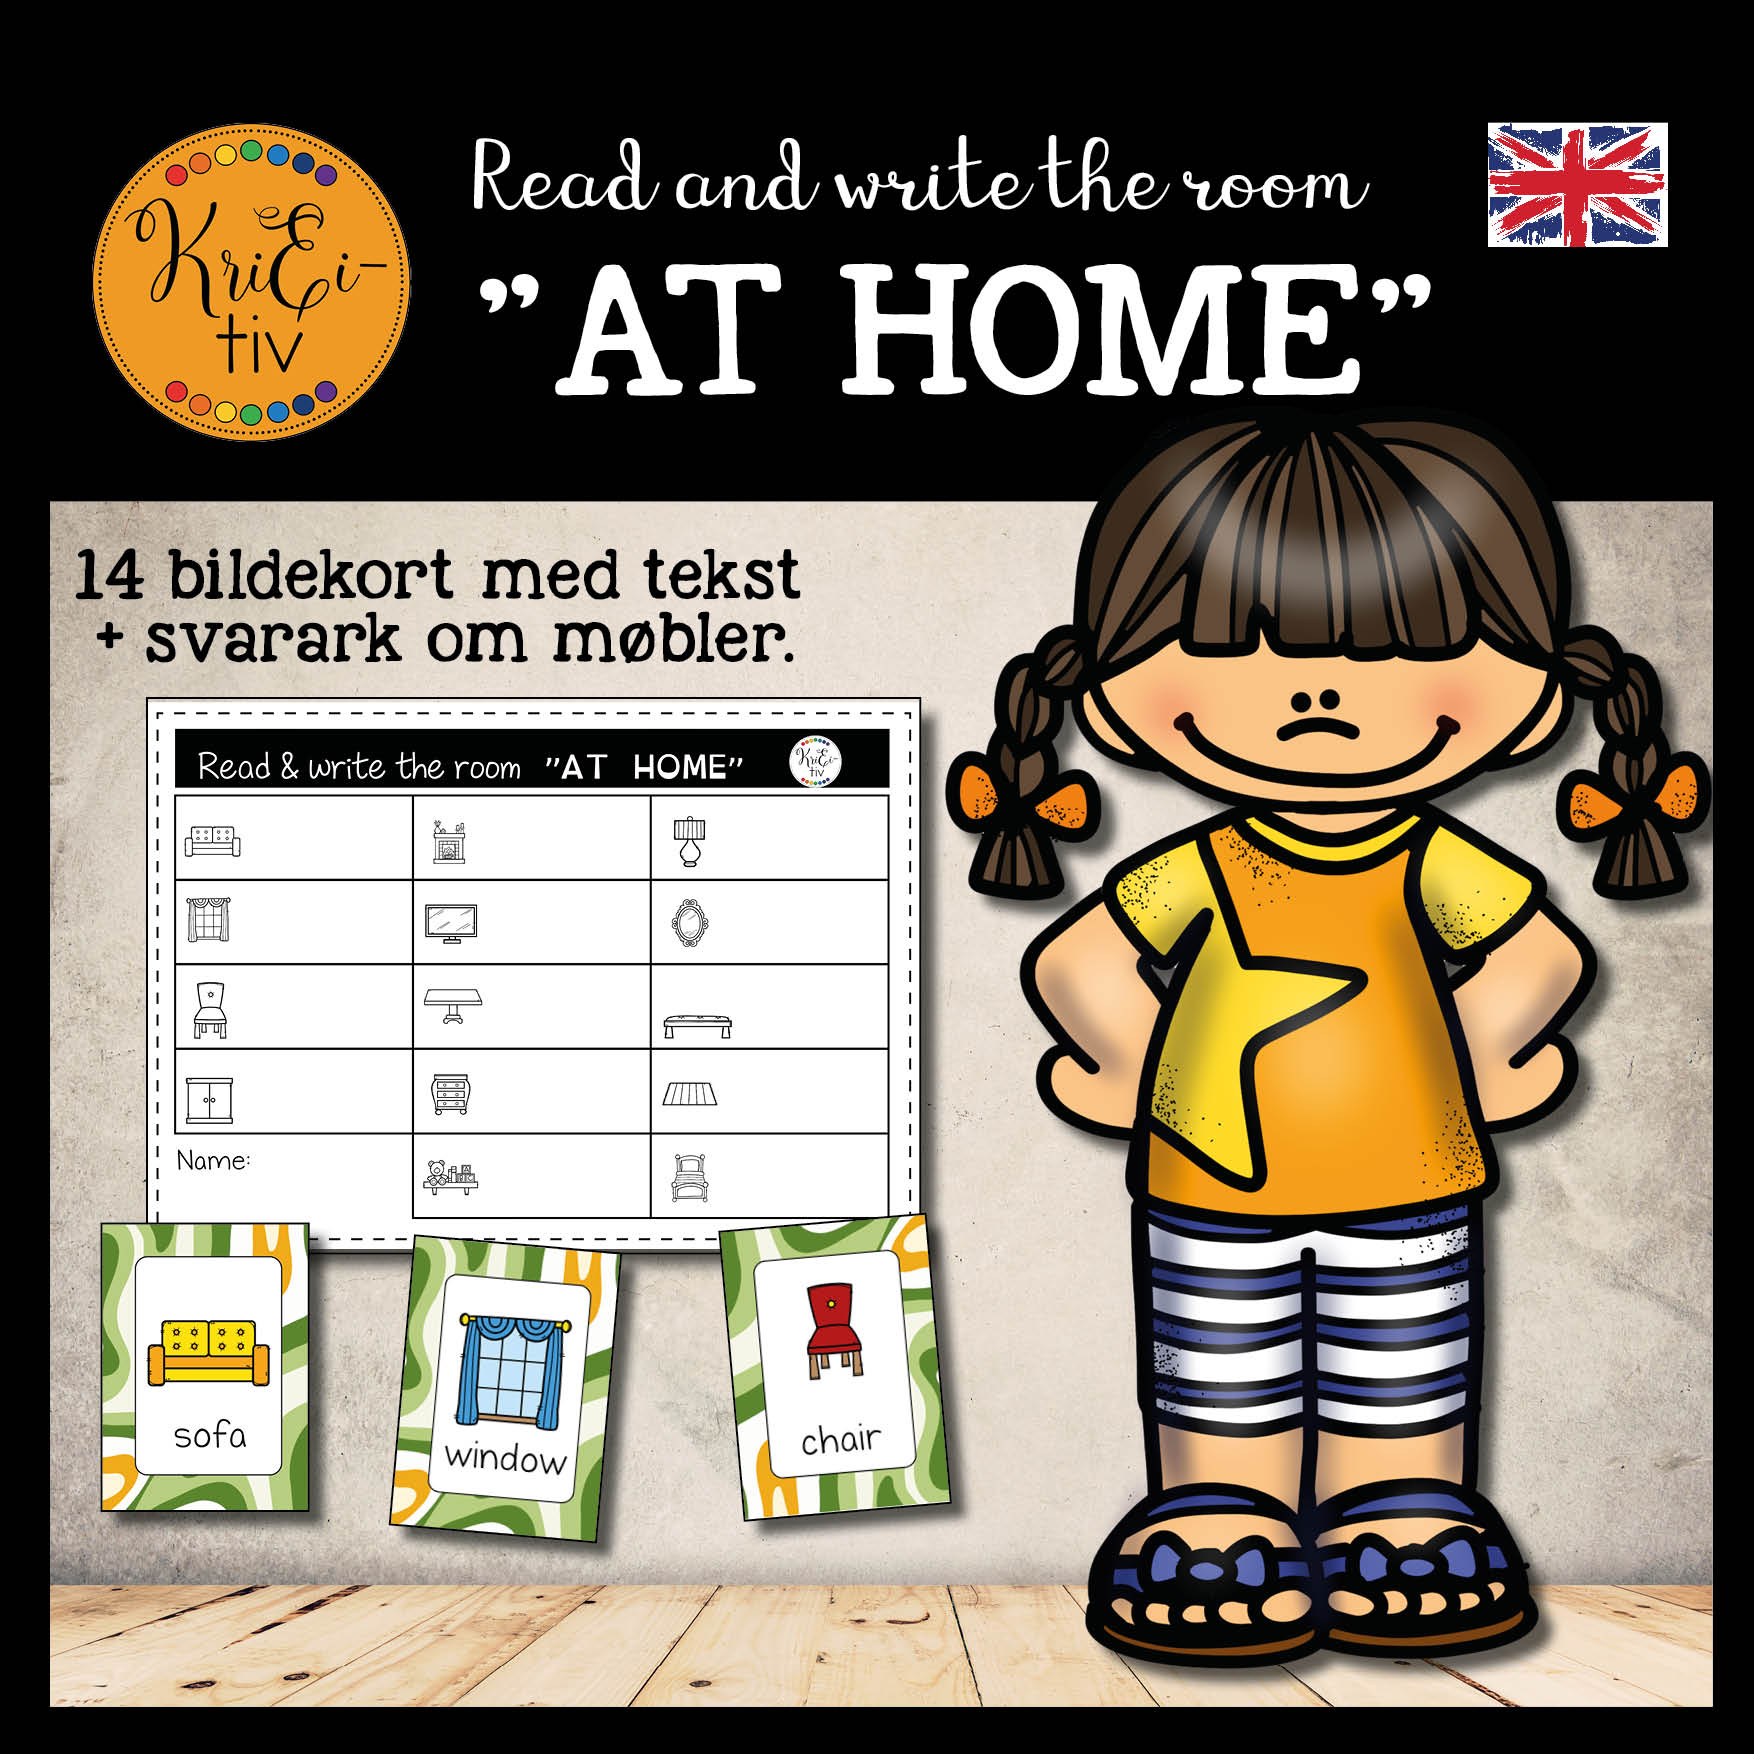 “AT HOME” – read and write the room 🇬🇧